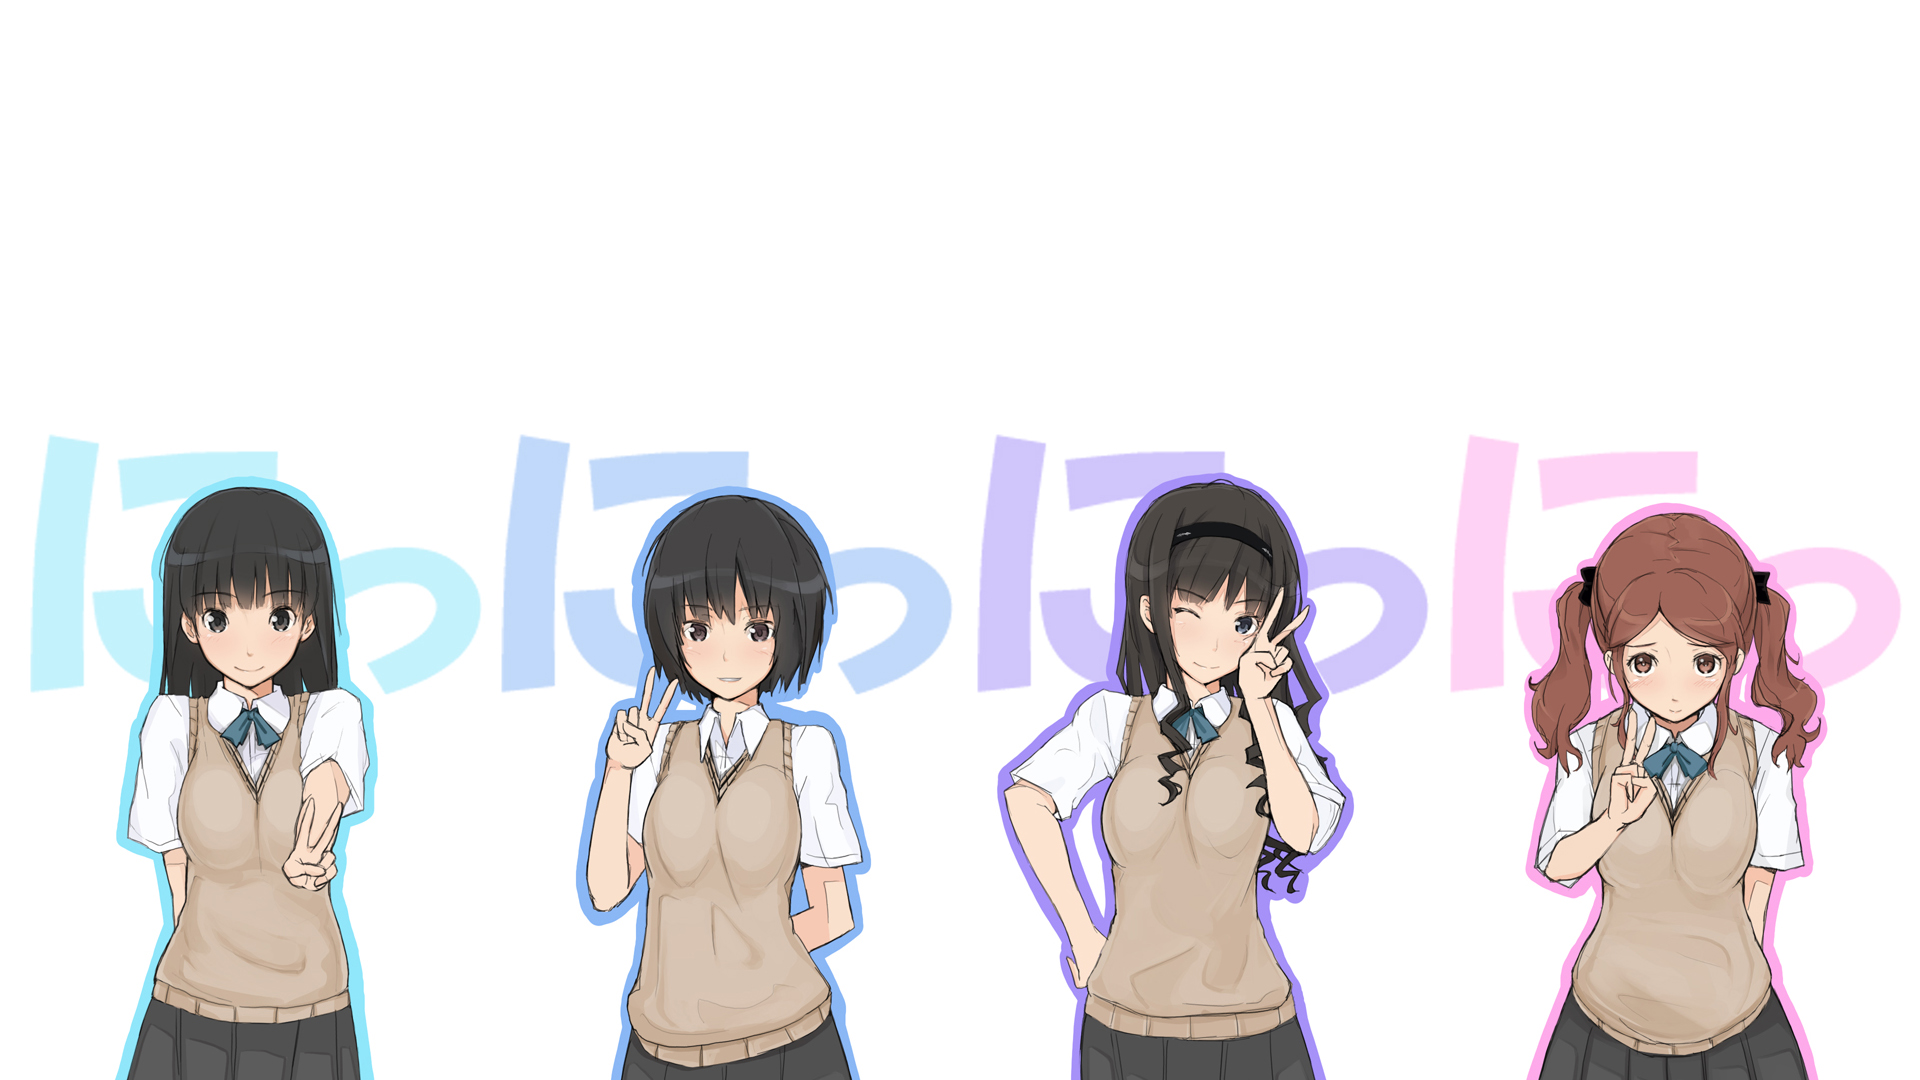 Anime 1920x1080 Amagami SS anime anime girls simple background white background frontal view dark hair